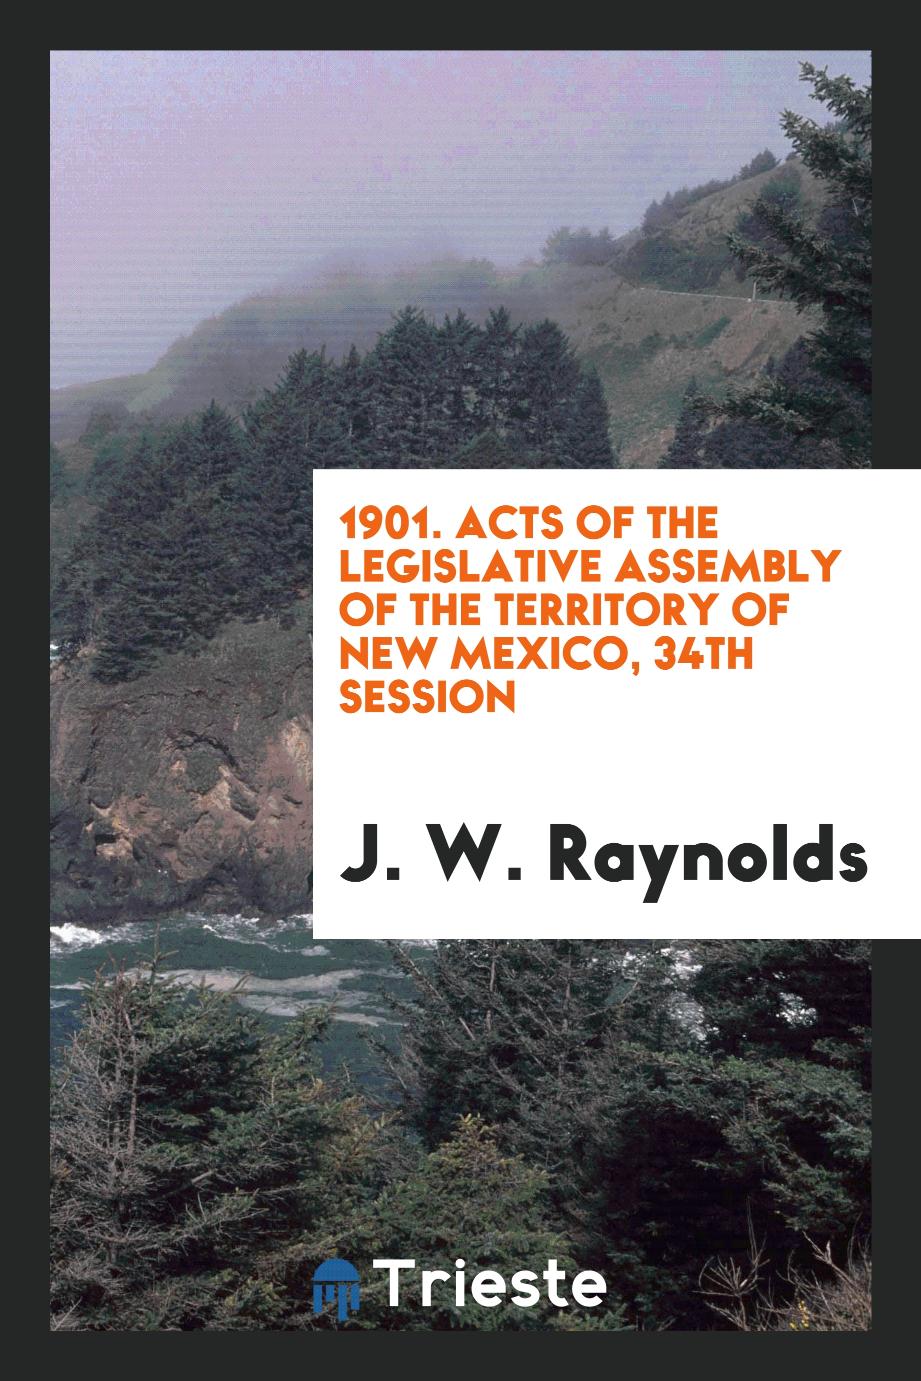 1901. Acts of the Legislative Assembly of the Territory of New Mexico, 34th Session